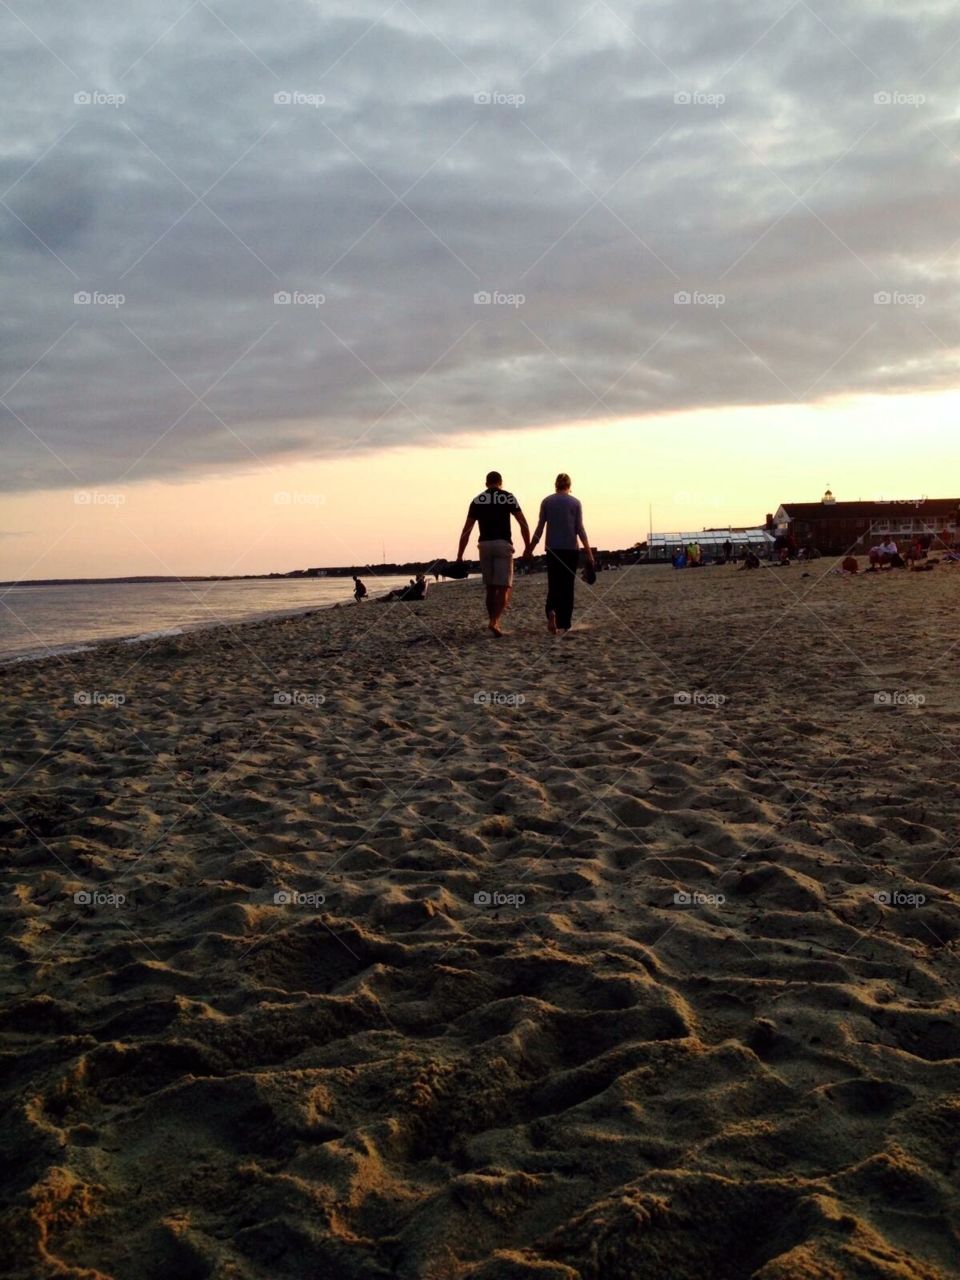 Hand in hand. Cape cod sunset with my best friend